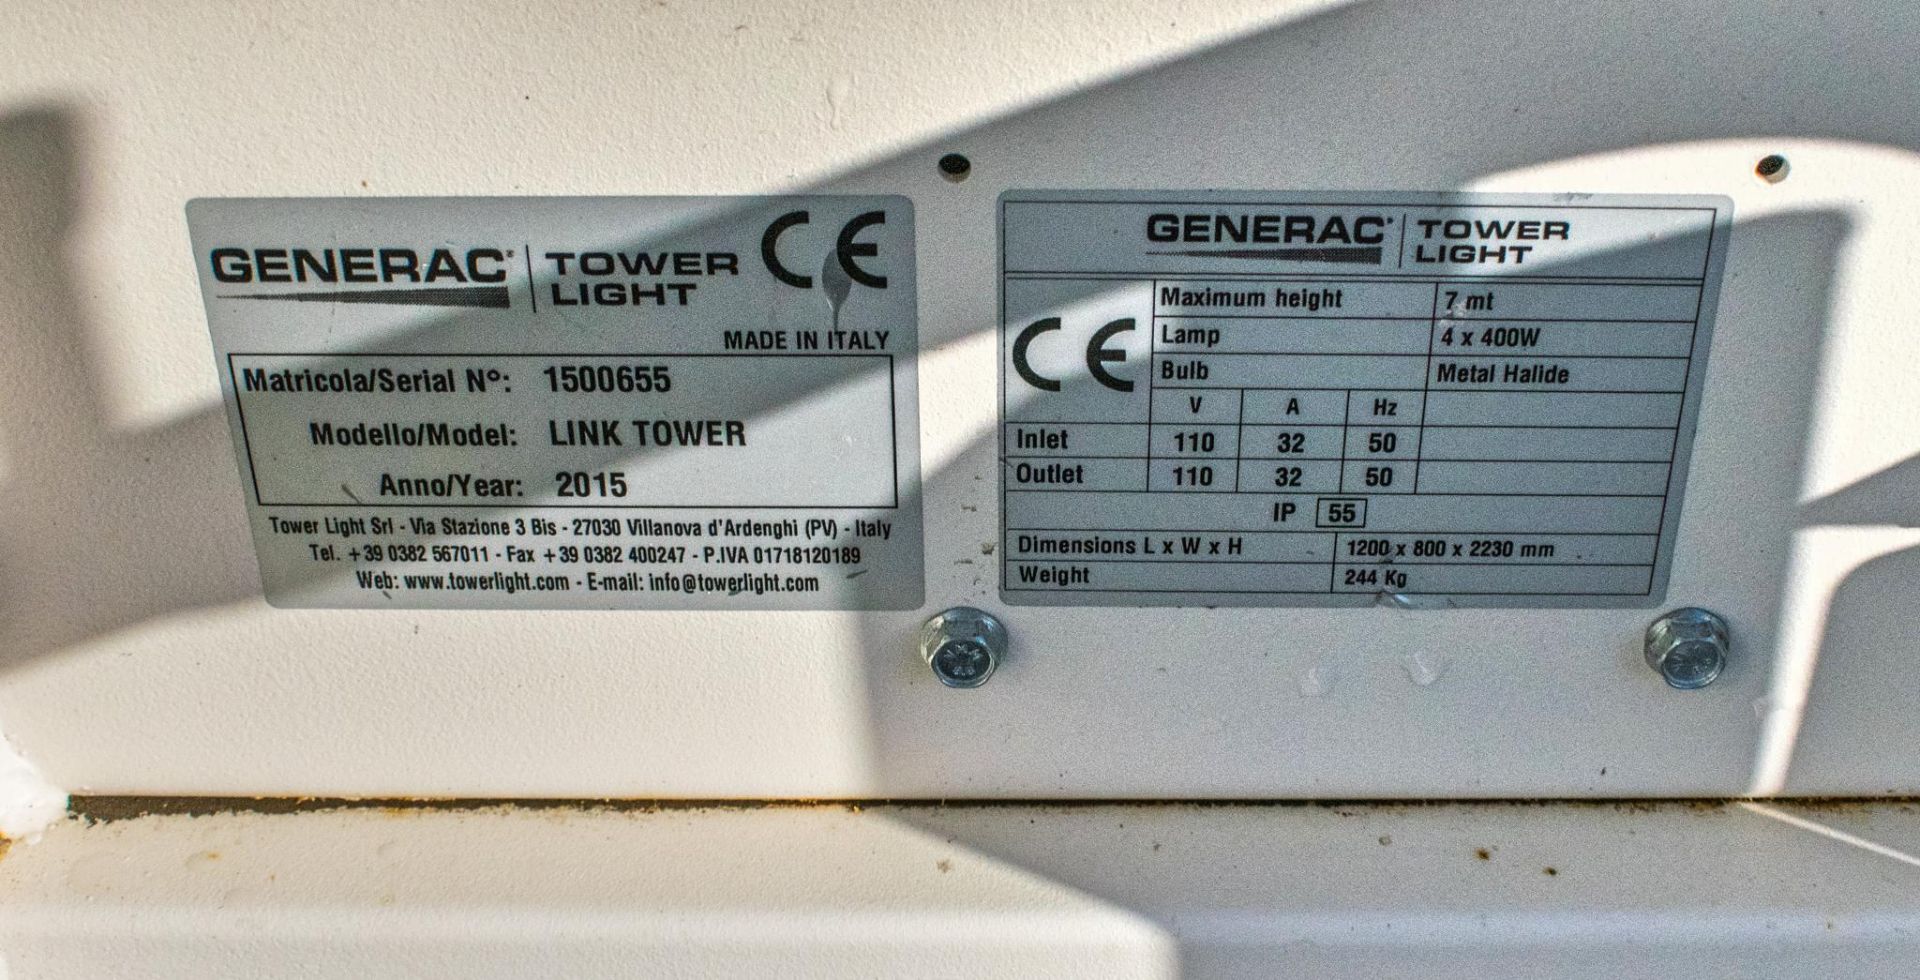 Generac 110v 7 metre Link Tower Light Year: 2015 S/N: 1500655 A704298 - Image 4 of 4